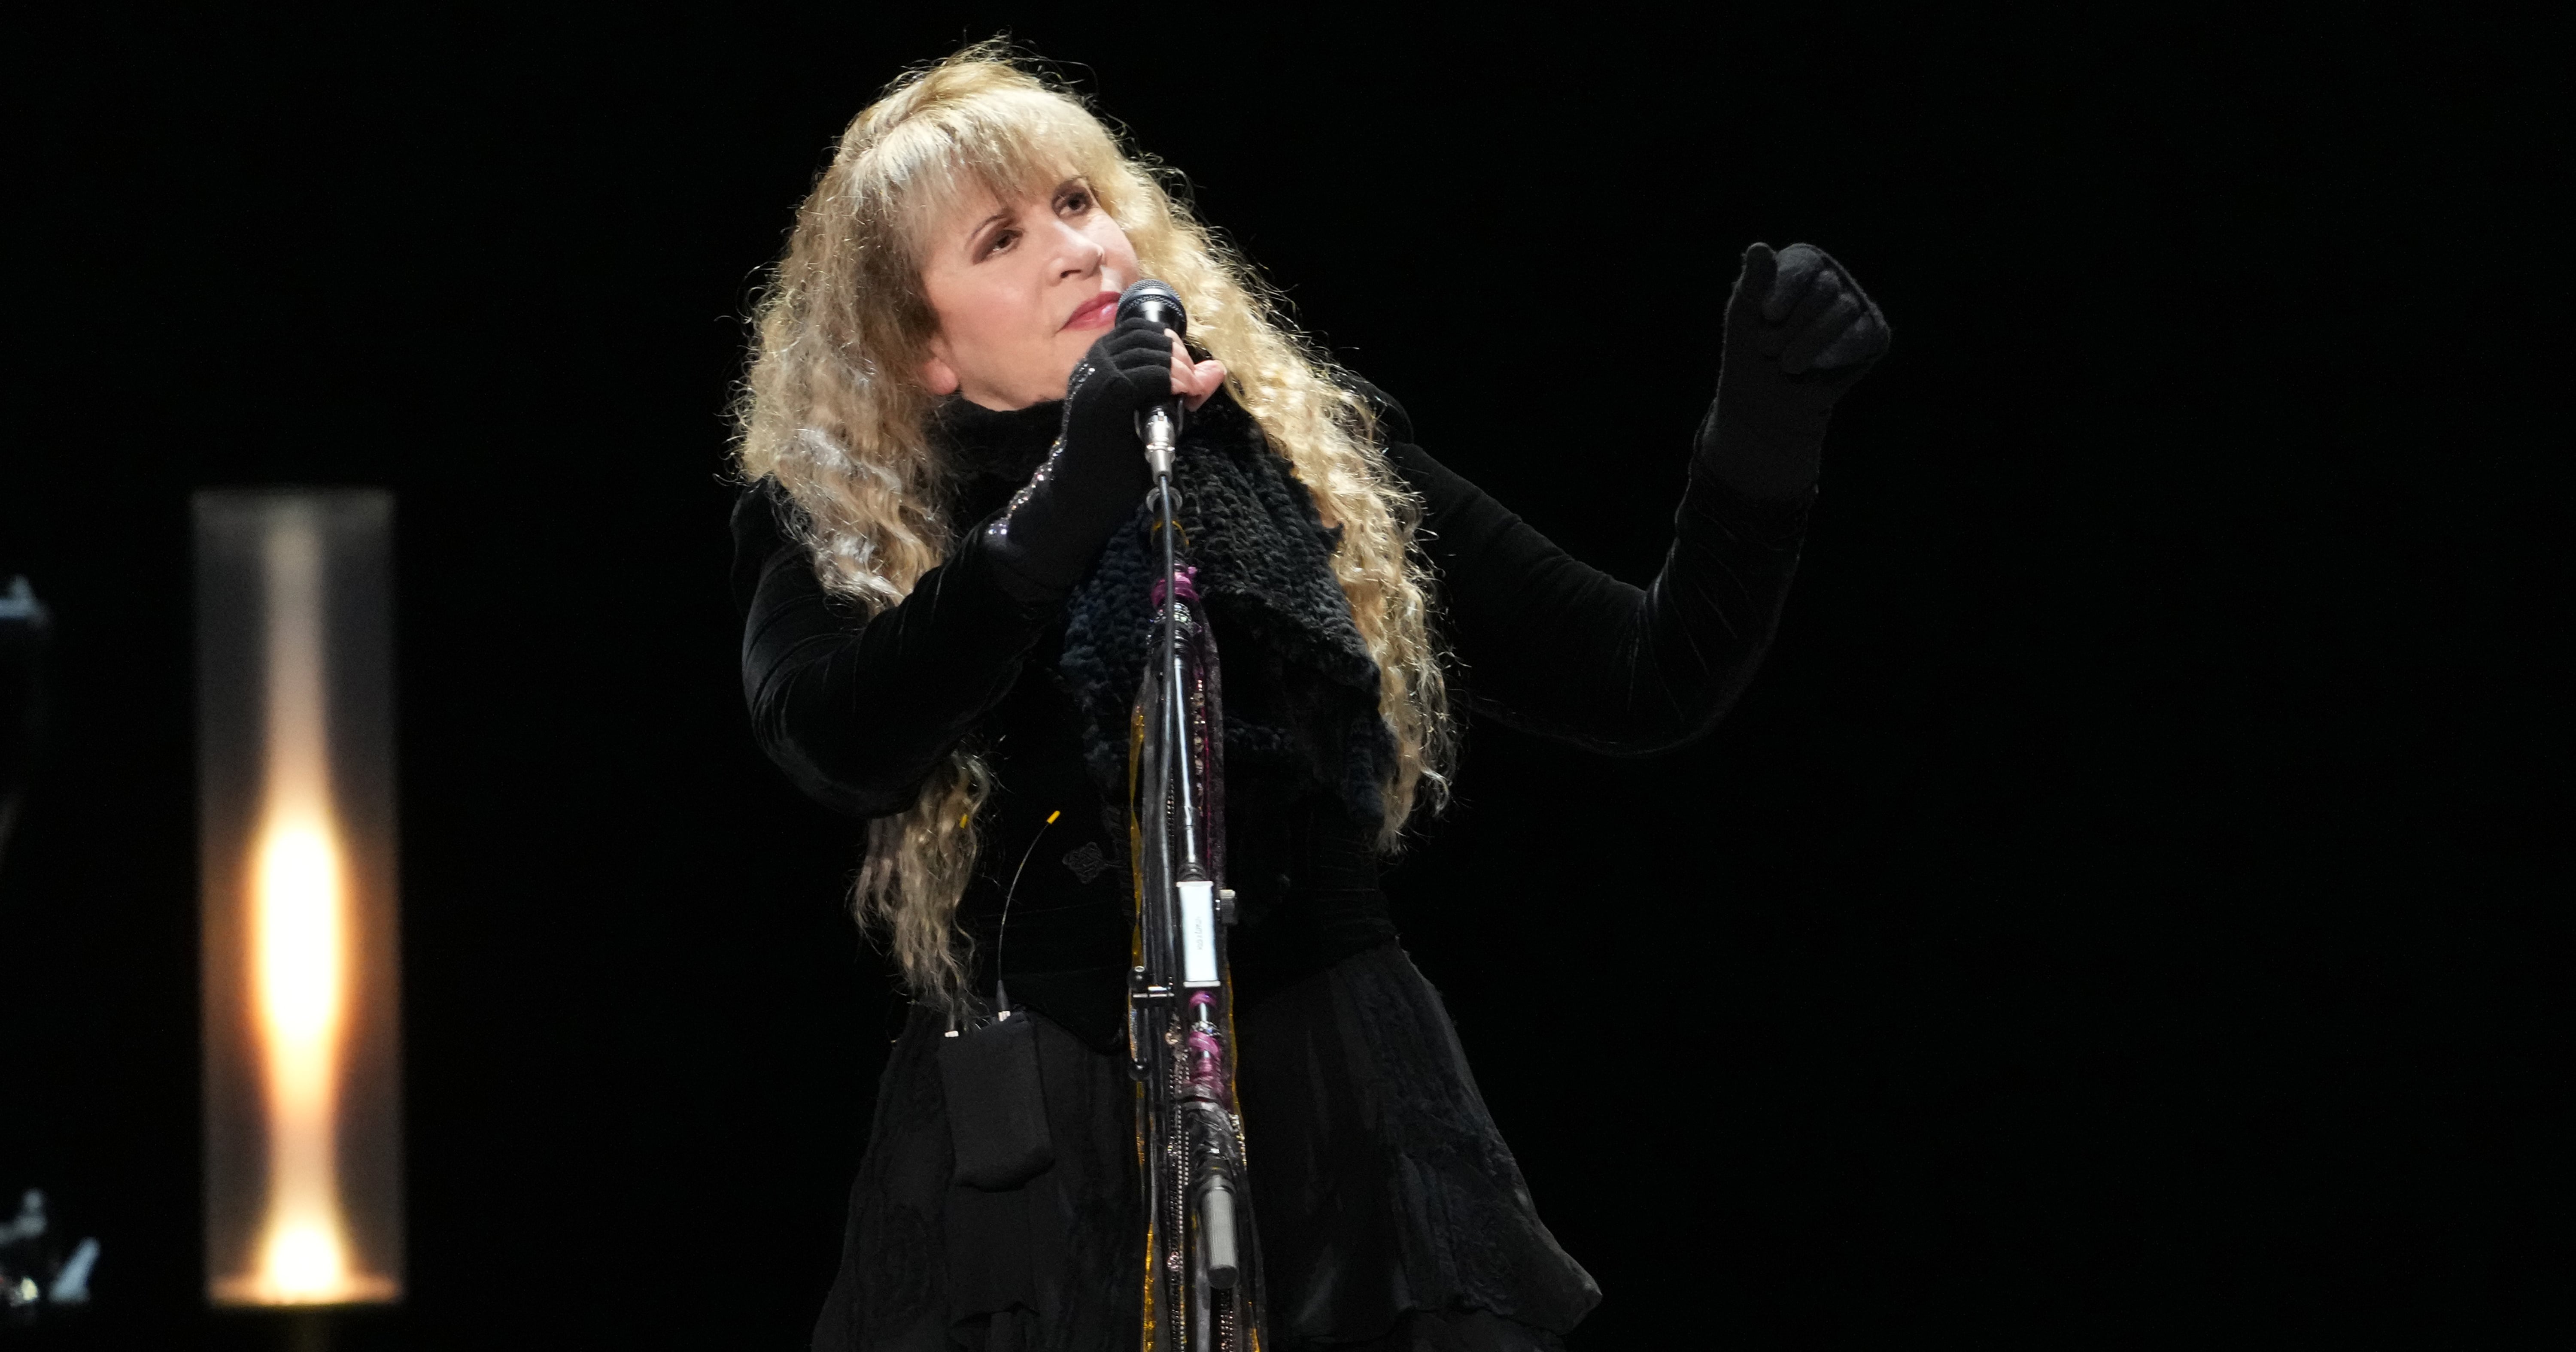 Stevie Nicks on Being the Inspiration Behind “Daisy Jones”: “It Was Very Emotional For Me”